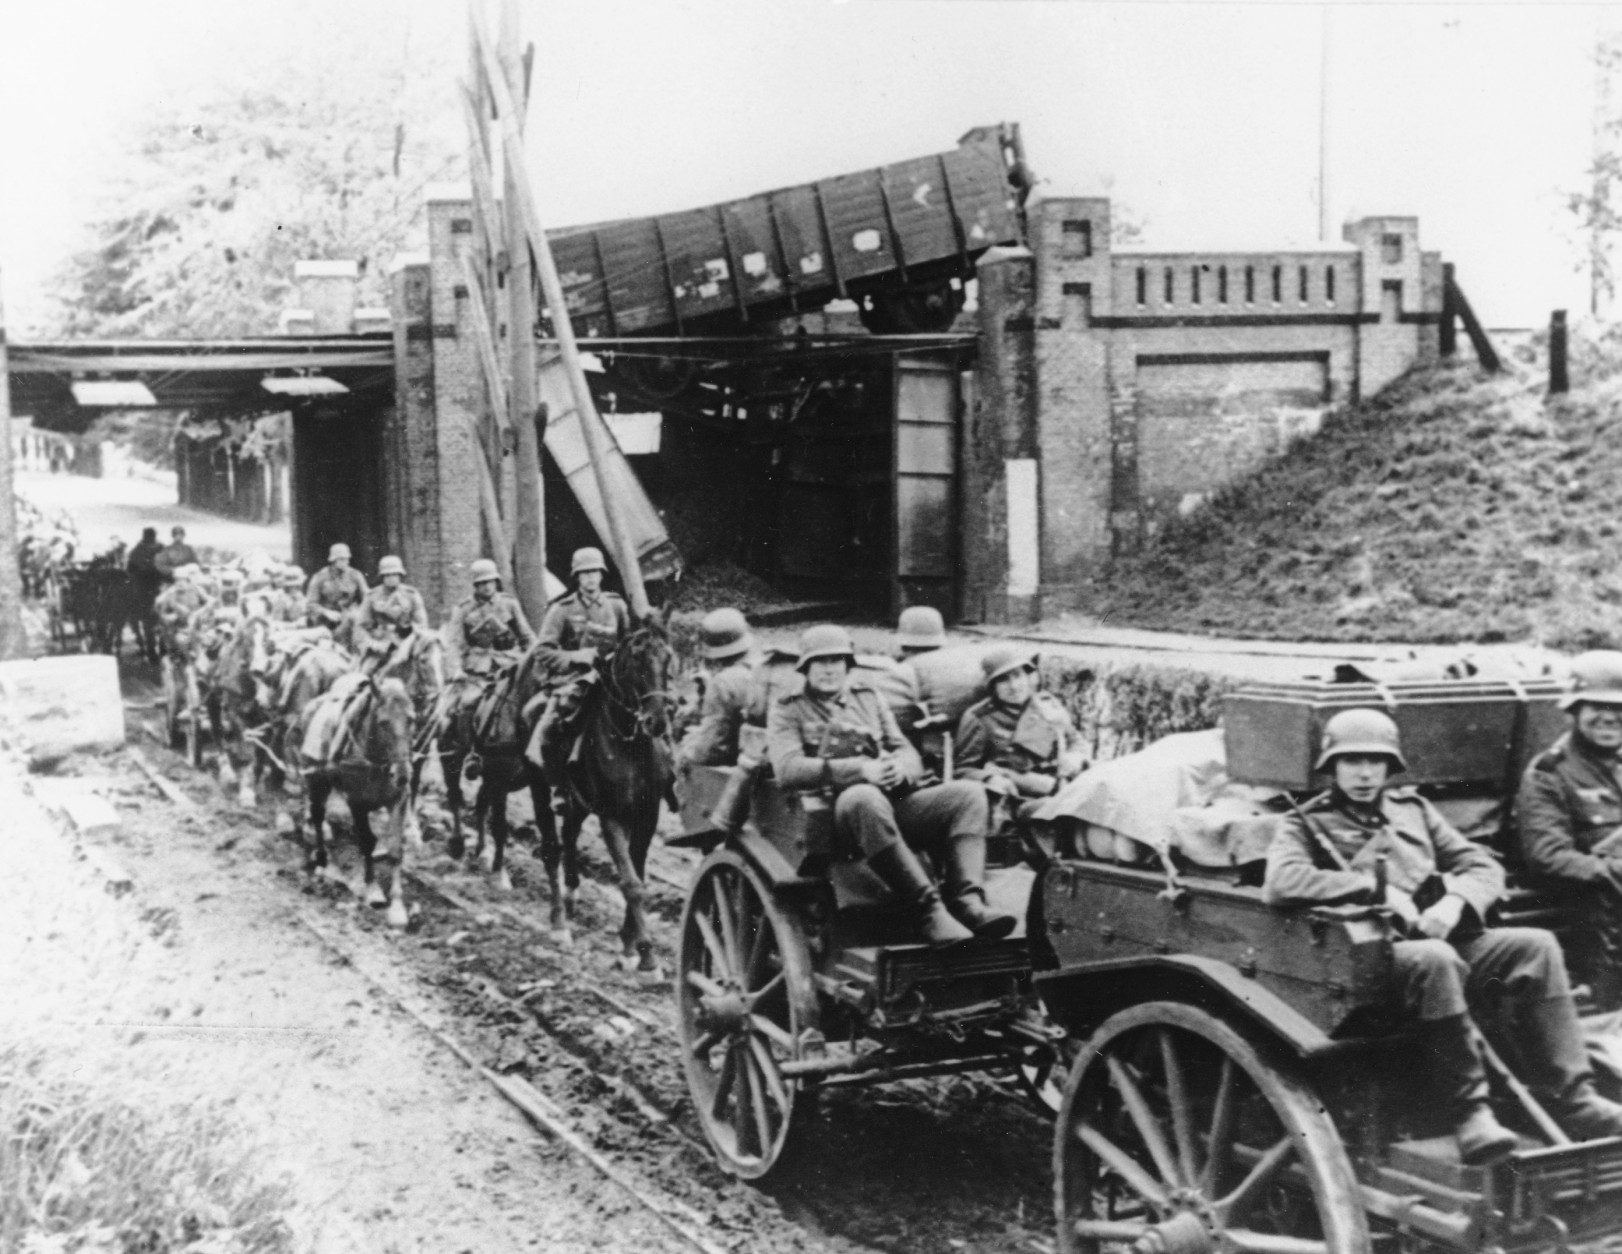 A German field artillery detachment passes under a destroyed bridge at an unknown location in the Netherlands, on May 21, 1940, as German troops invade the Low Countries during World War II. (AP Photo) (AP Photo)